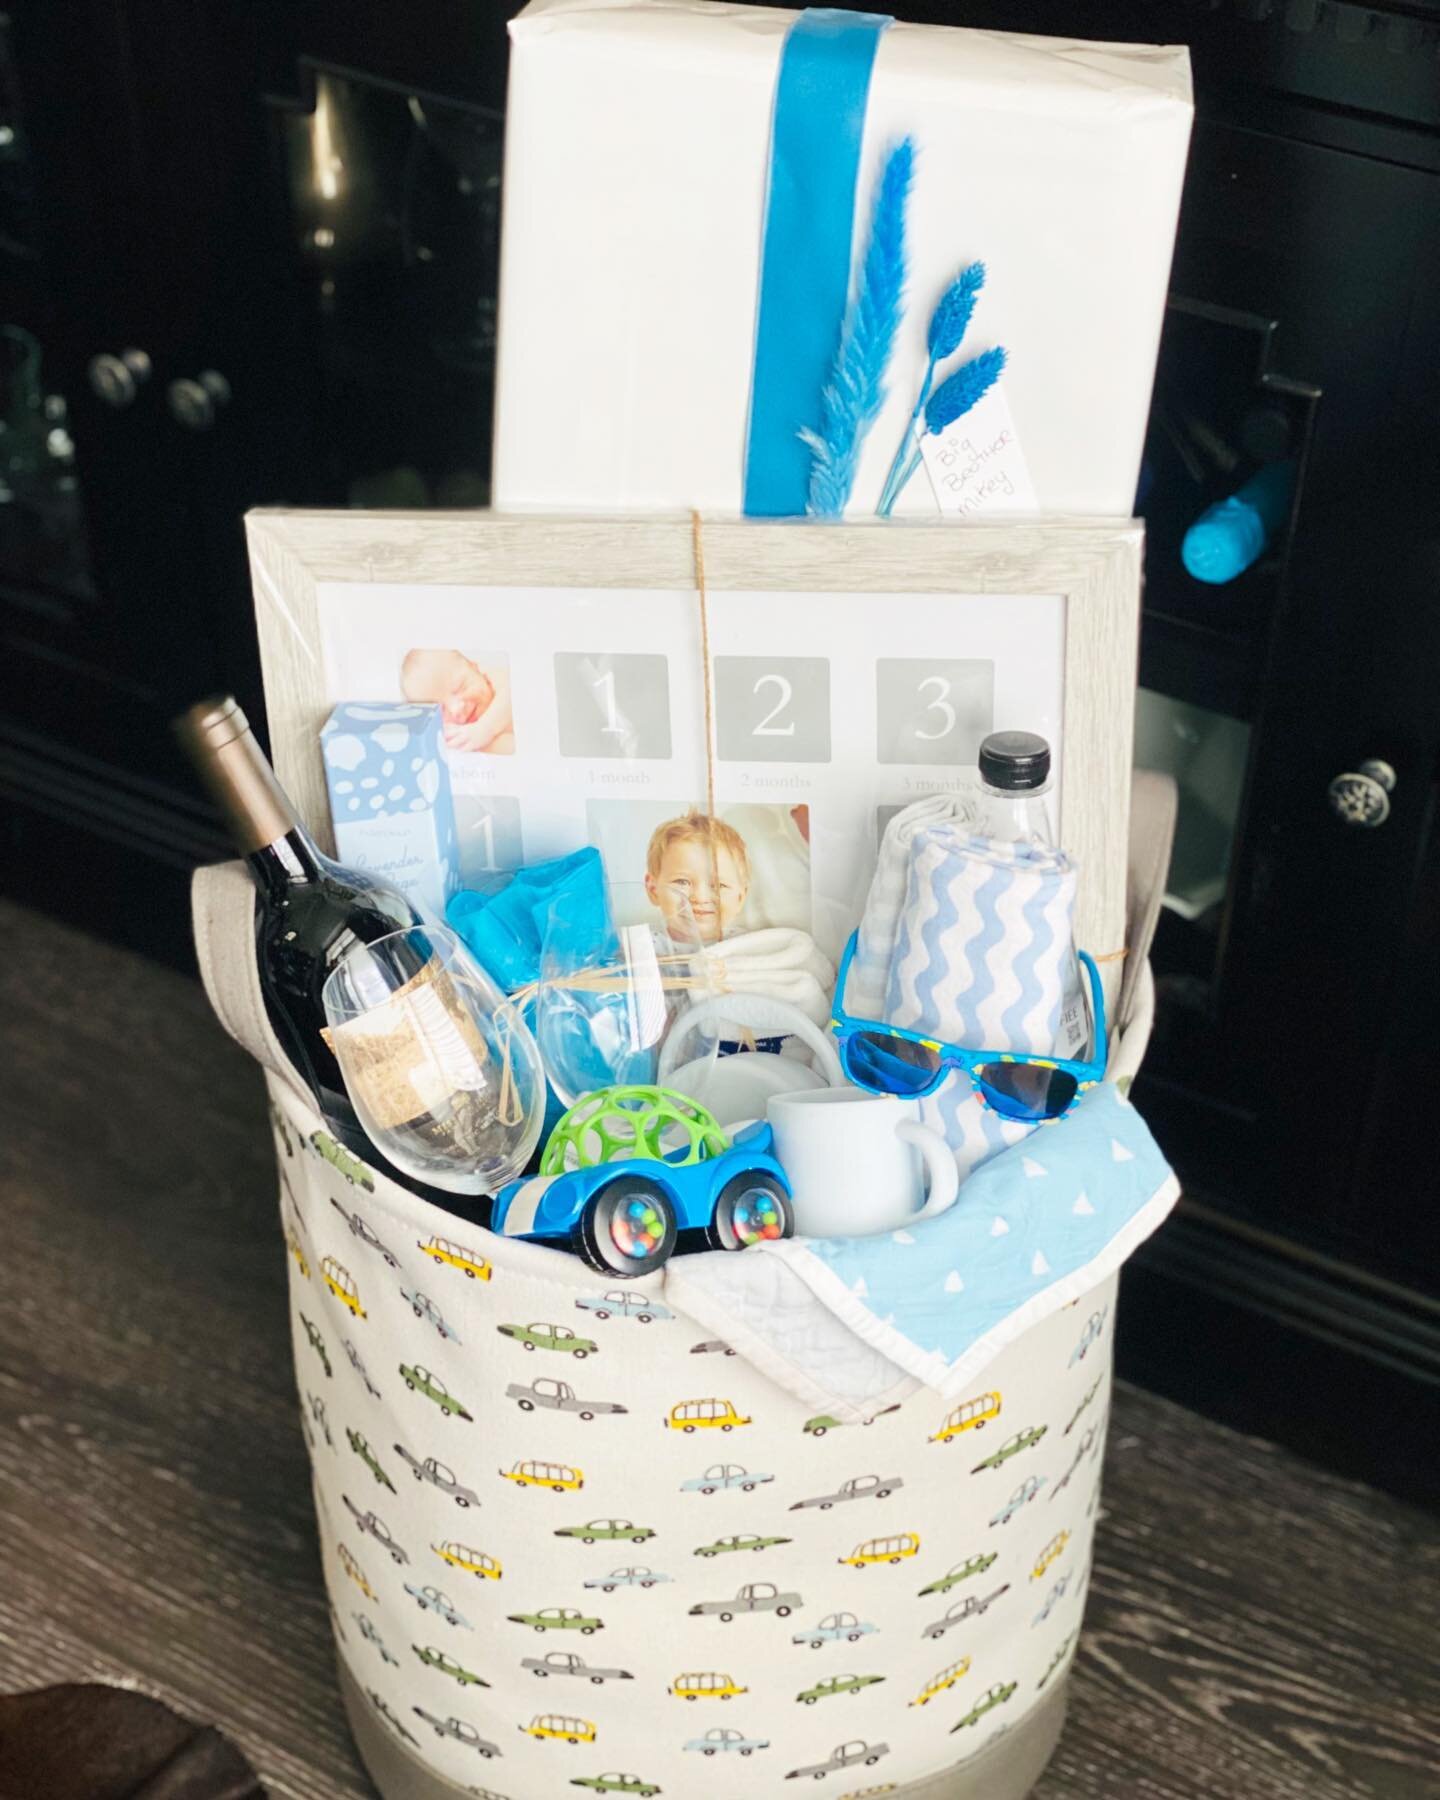 A basket to celebrate the whole family, and welcome a new baby into the world. 
.
.
.

#giftbasket #giftbaskets #giftideas #gourmetgiftbaskets #giftbasketsforalloccasions #customizedgiftbasket #customizedgifts #giftguide #luxurygiftbaskets #homedecor